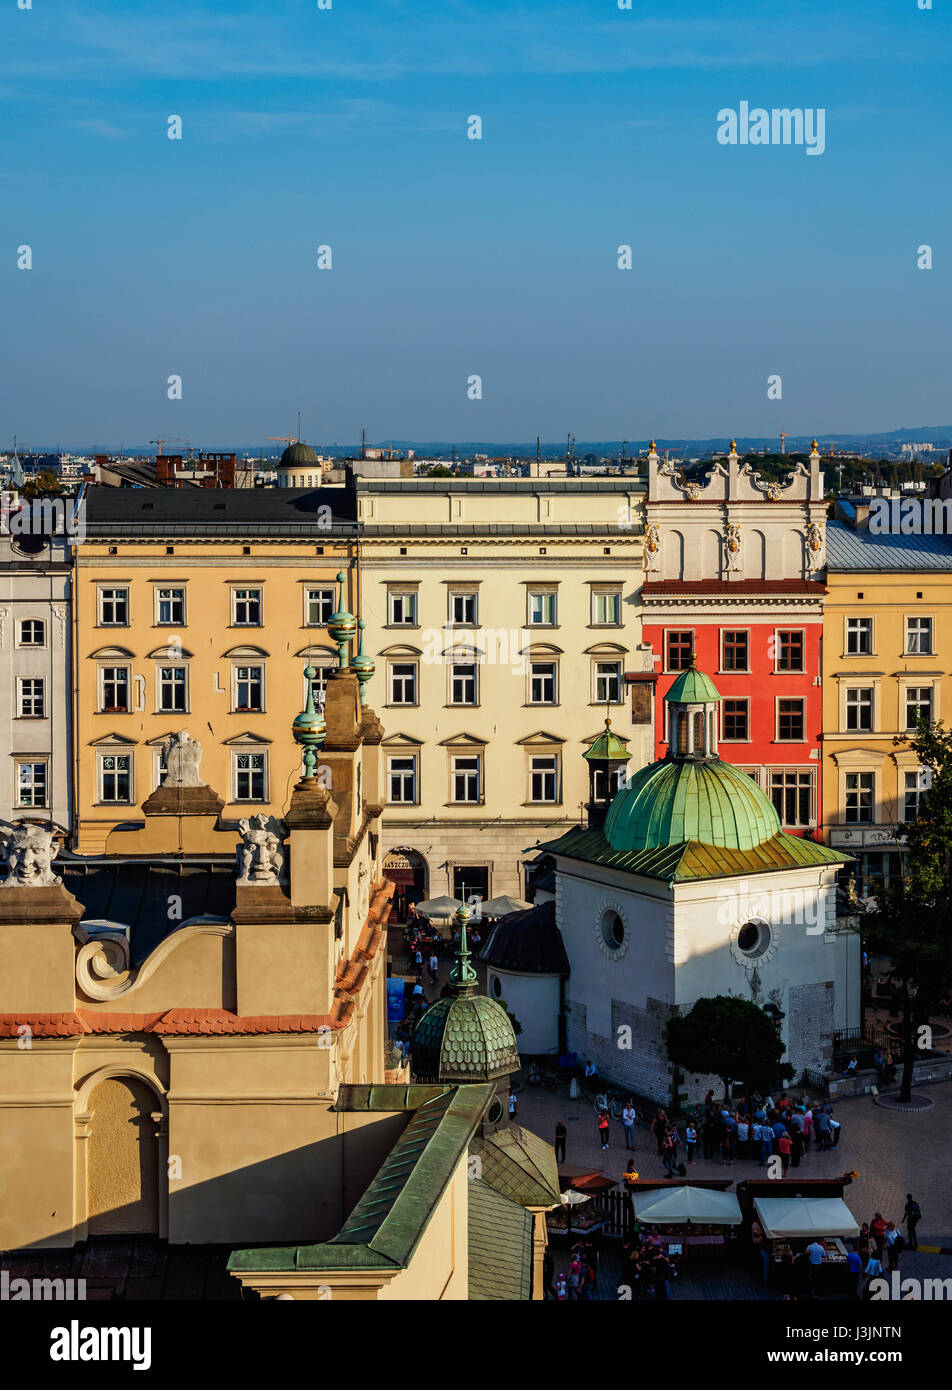 Poland, Lesser Poland Voivodeship, Cracow, Elevated view of the Main Market Square Stock Photo